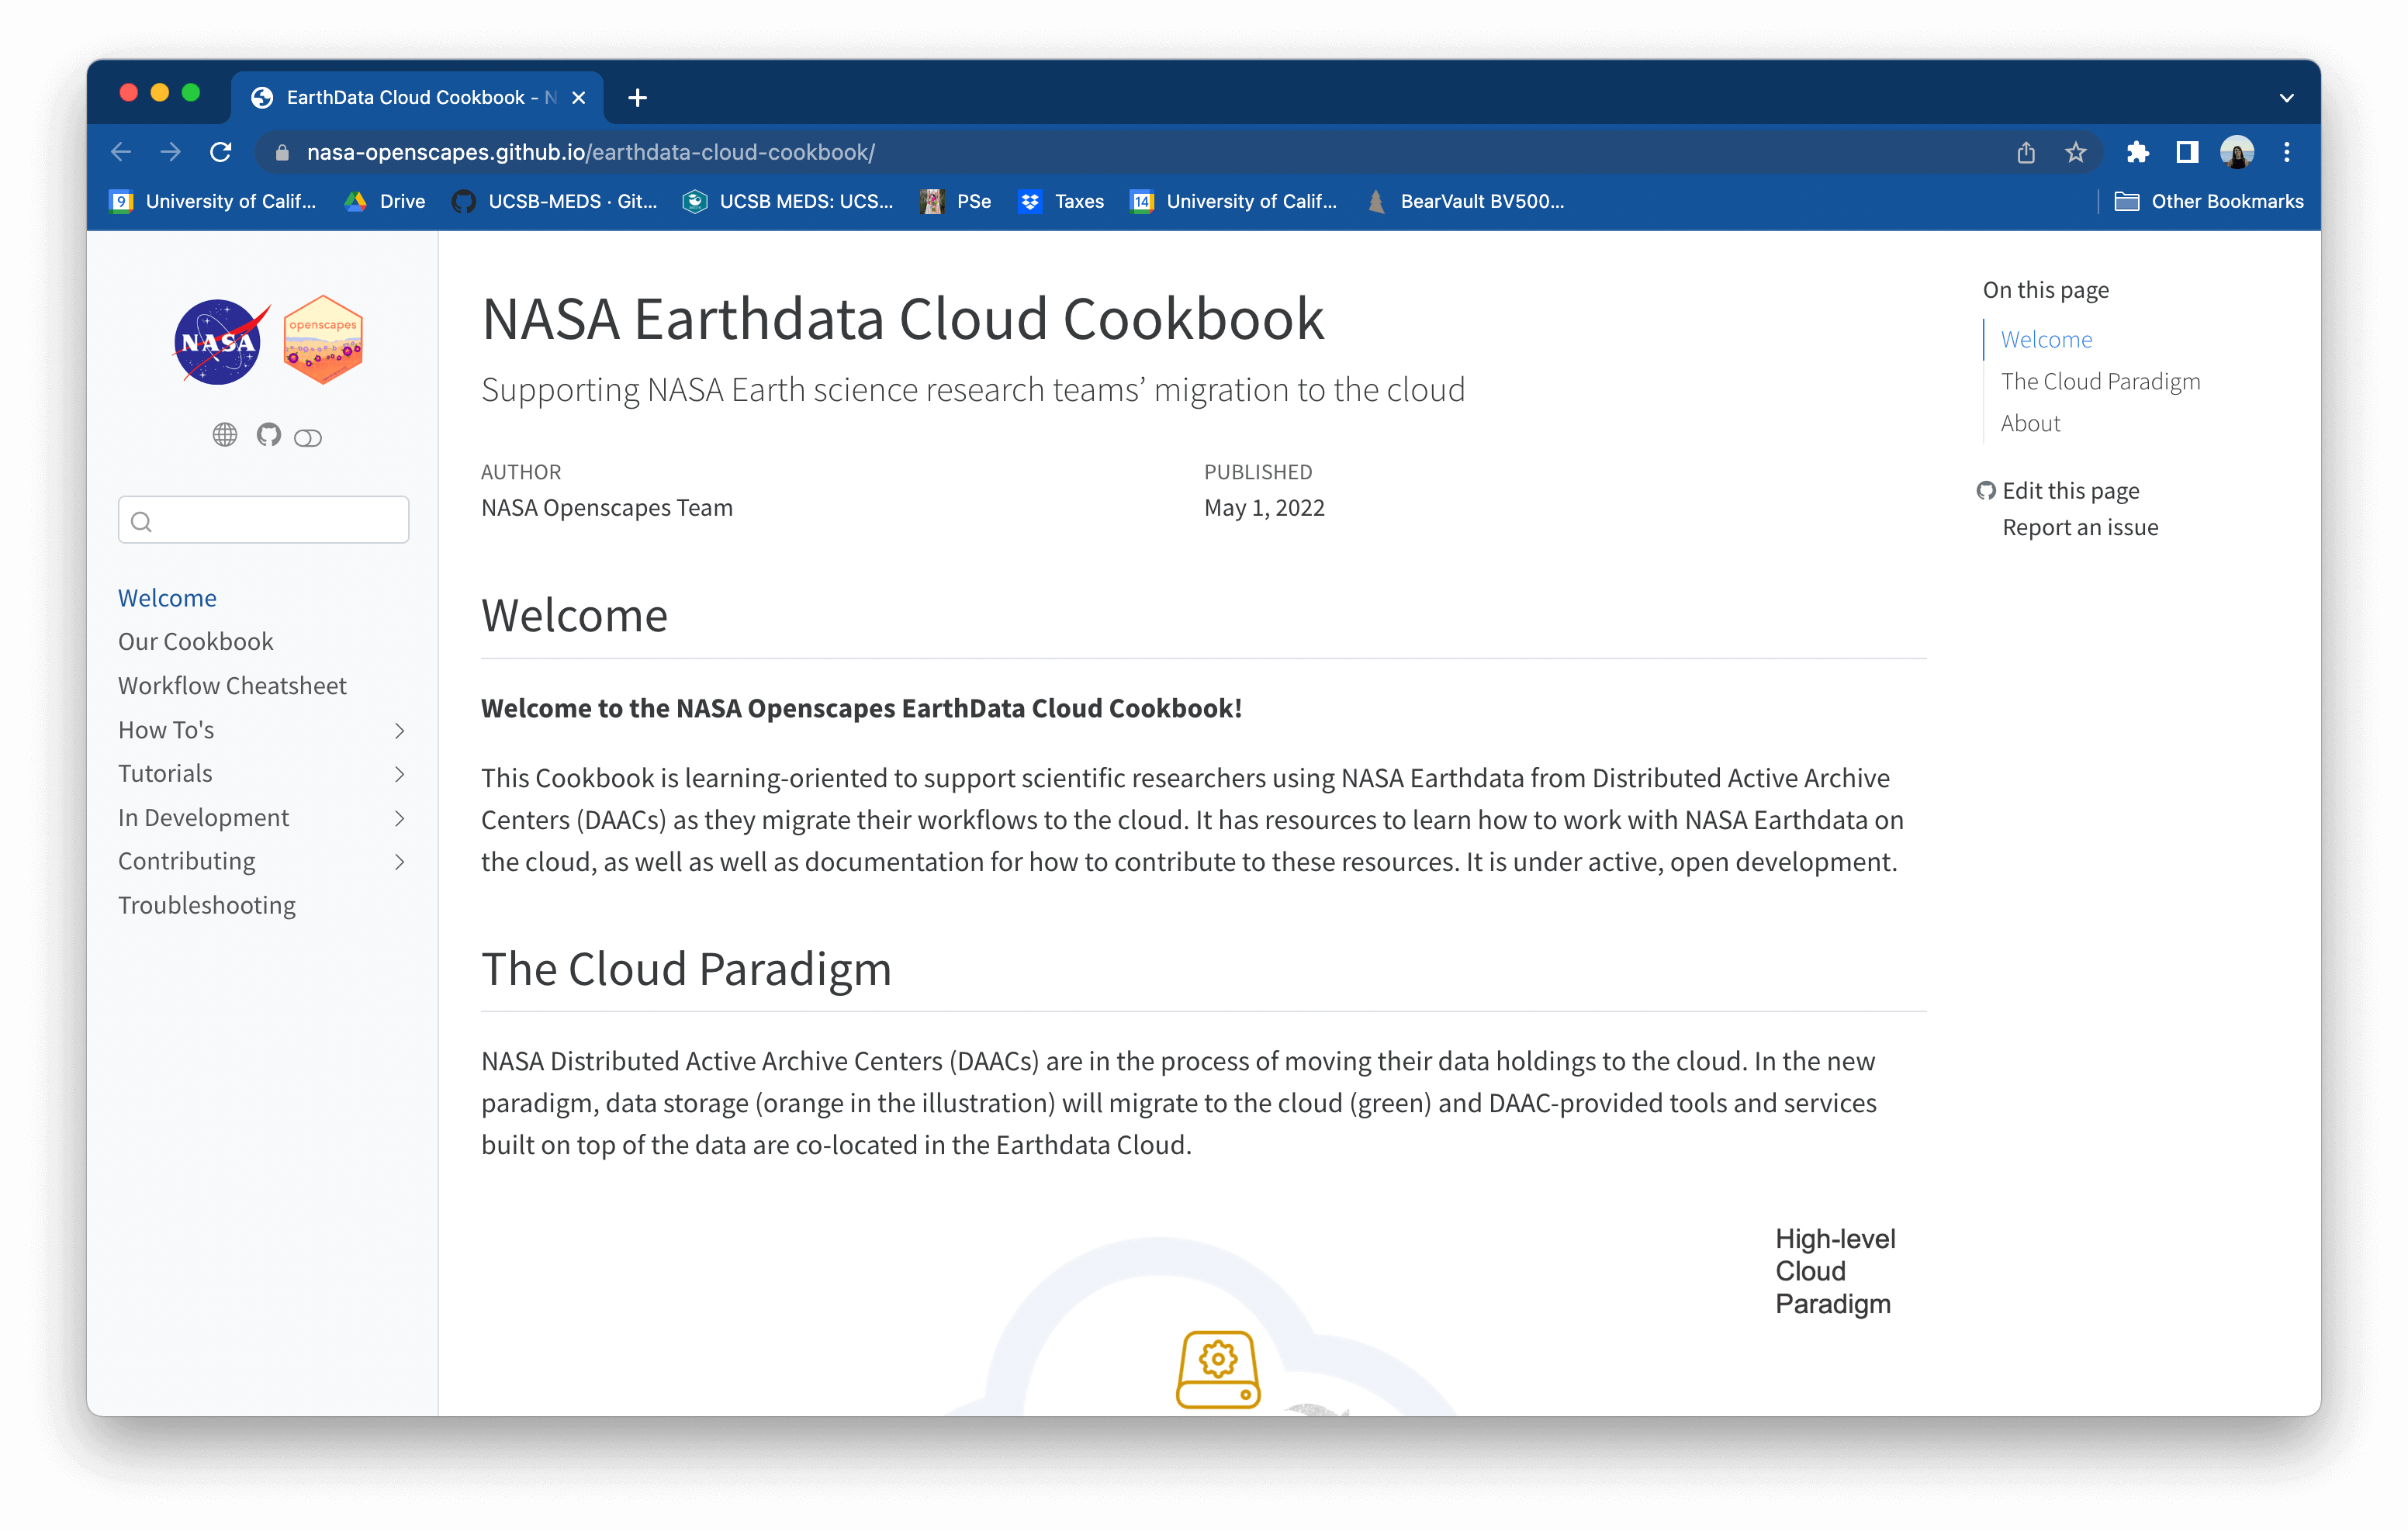 A screenshot of the NASA Earthdata Cloud Cookbook website, built using Quarto. To the left is a light gray vertical menu bar with sections including "How To's", "Tutorials", "In Development", and more. The body text is just to the right and begins with a "Welcome" section. The NASA and Openscapes logos are above the menu bar on the left.